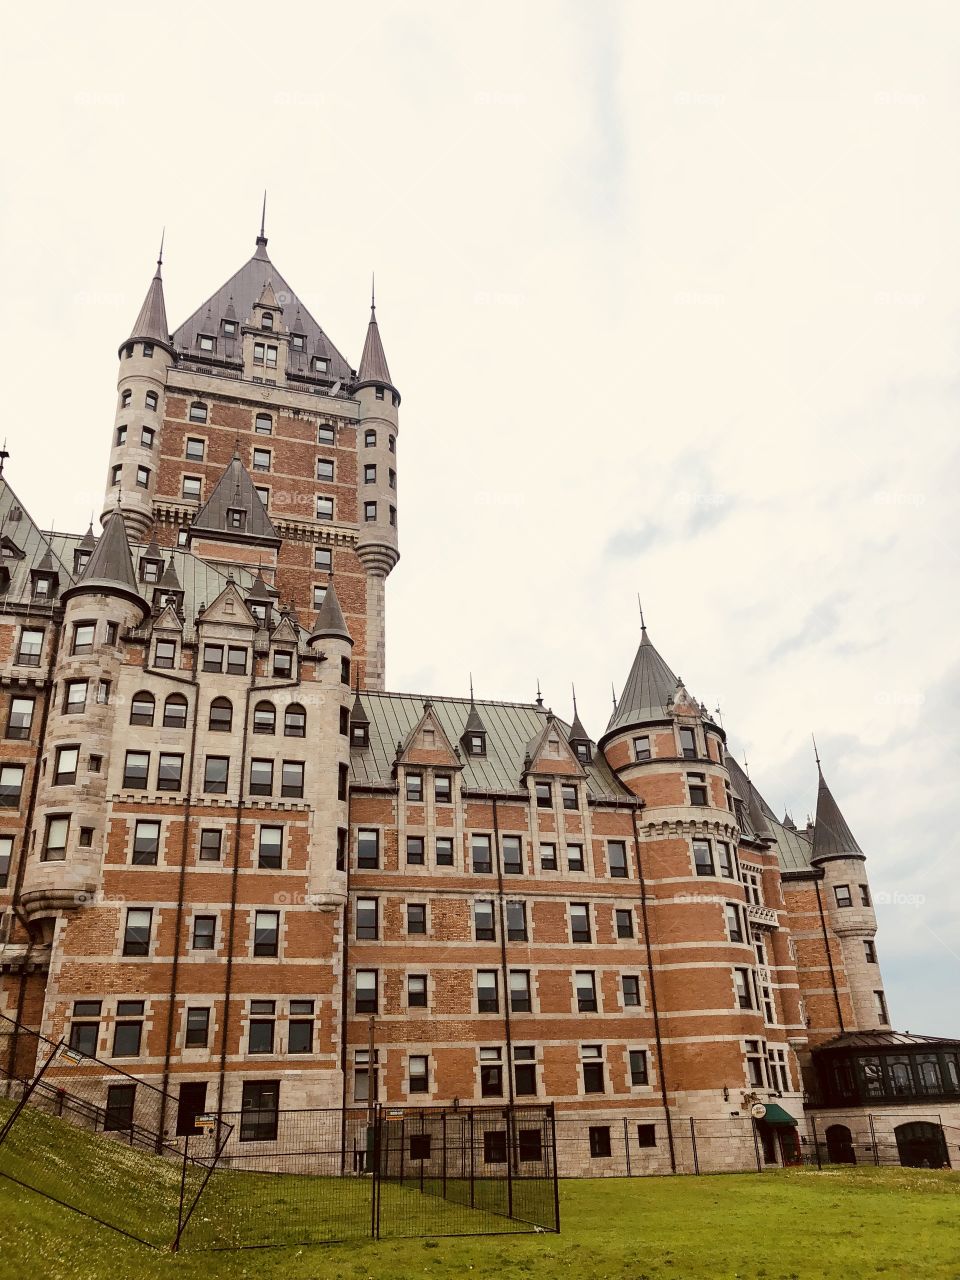 The majestic Frontenac Chateau hotel of Quebec city that looks like a french colonial castle